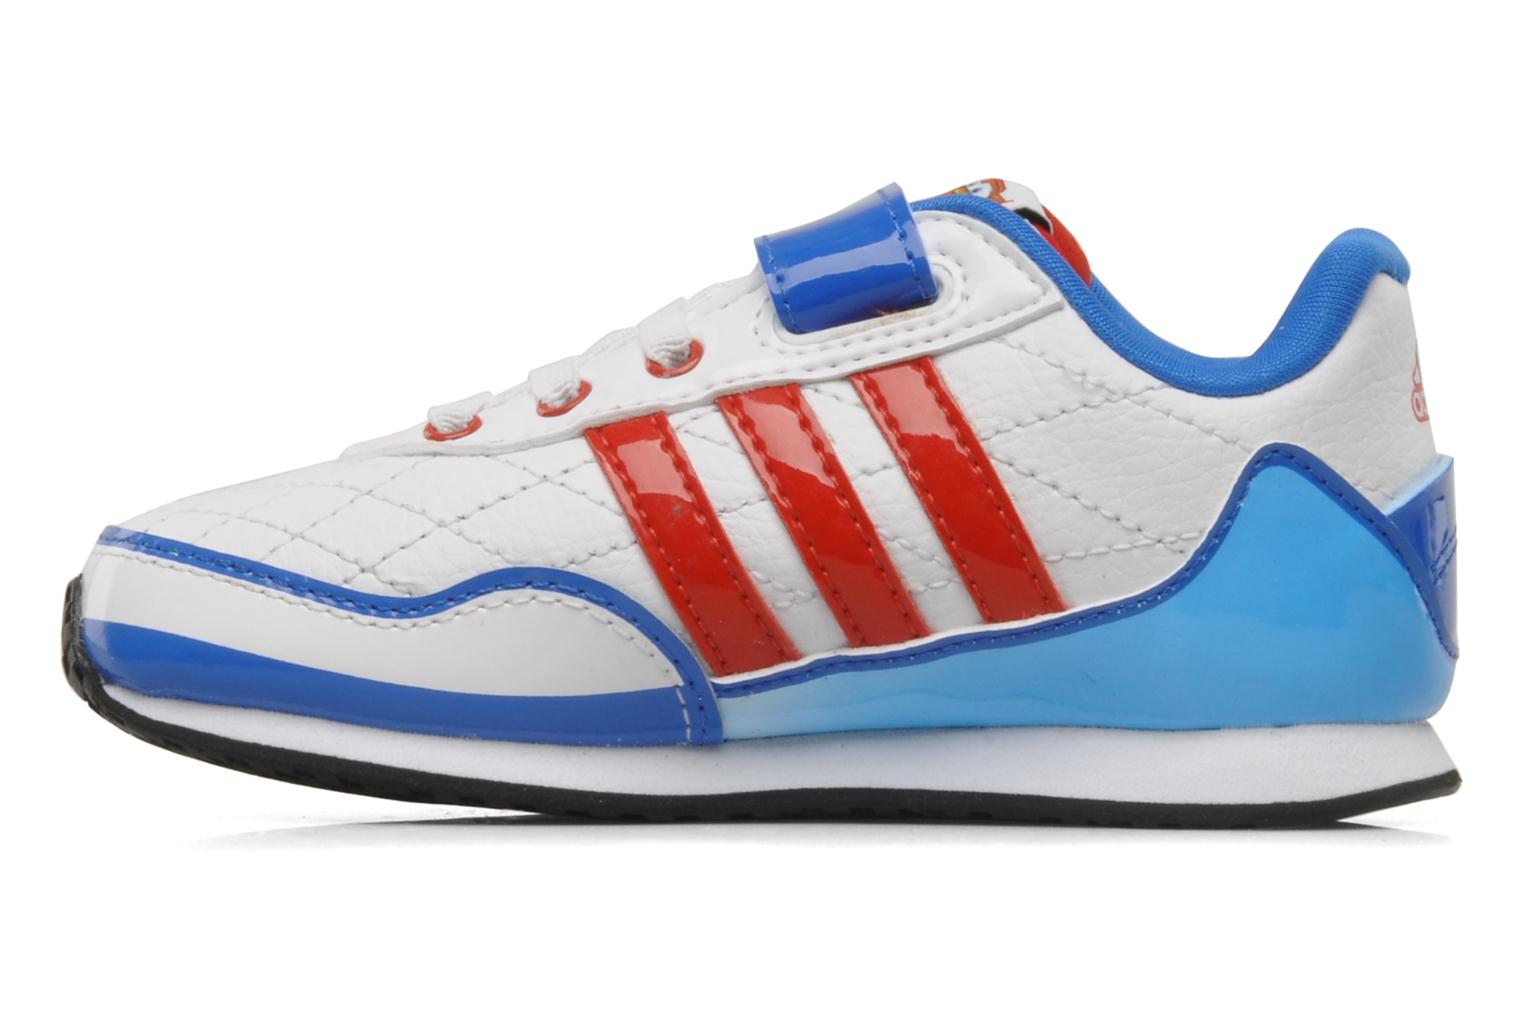 Adidas Performance Disney Cars 2 CF I Trainers in White at Sarenza.co ...